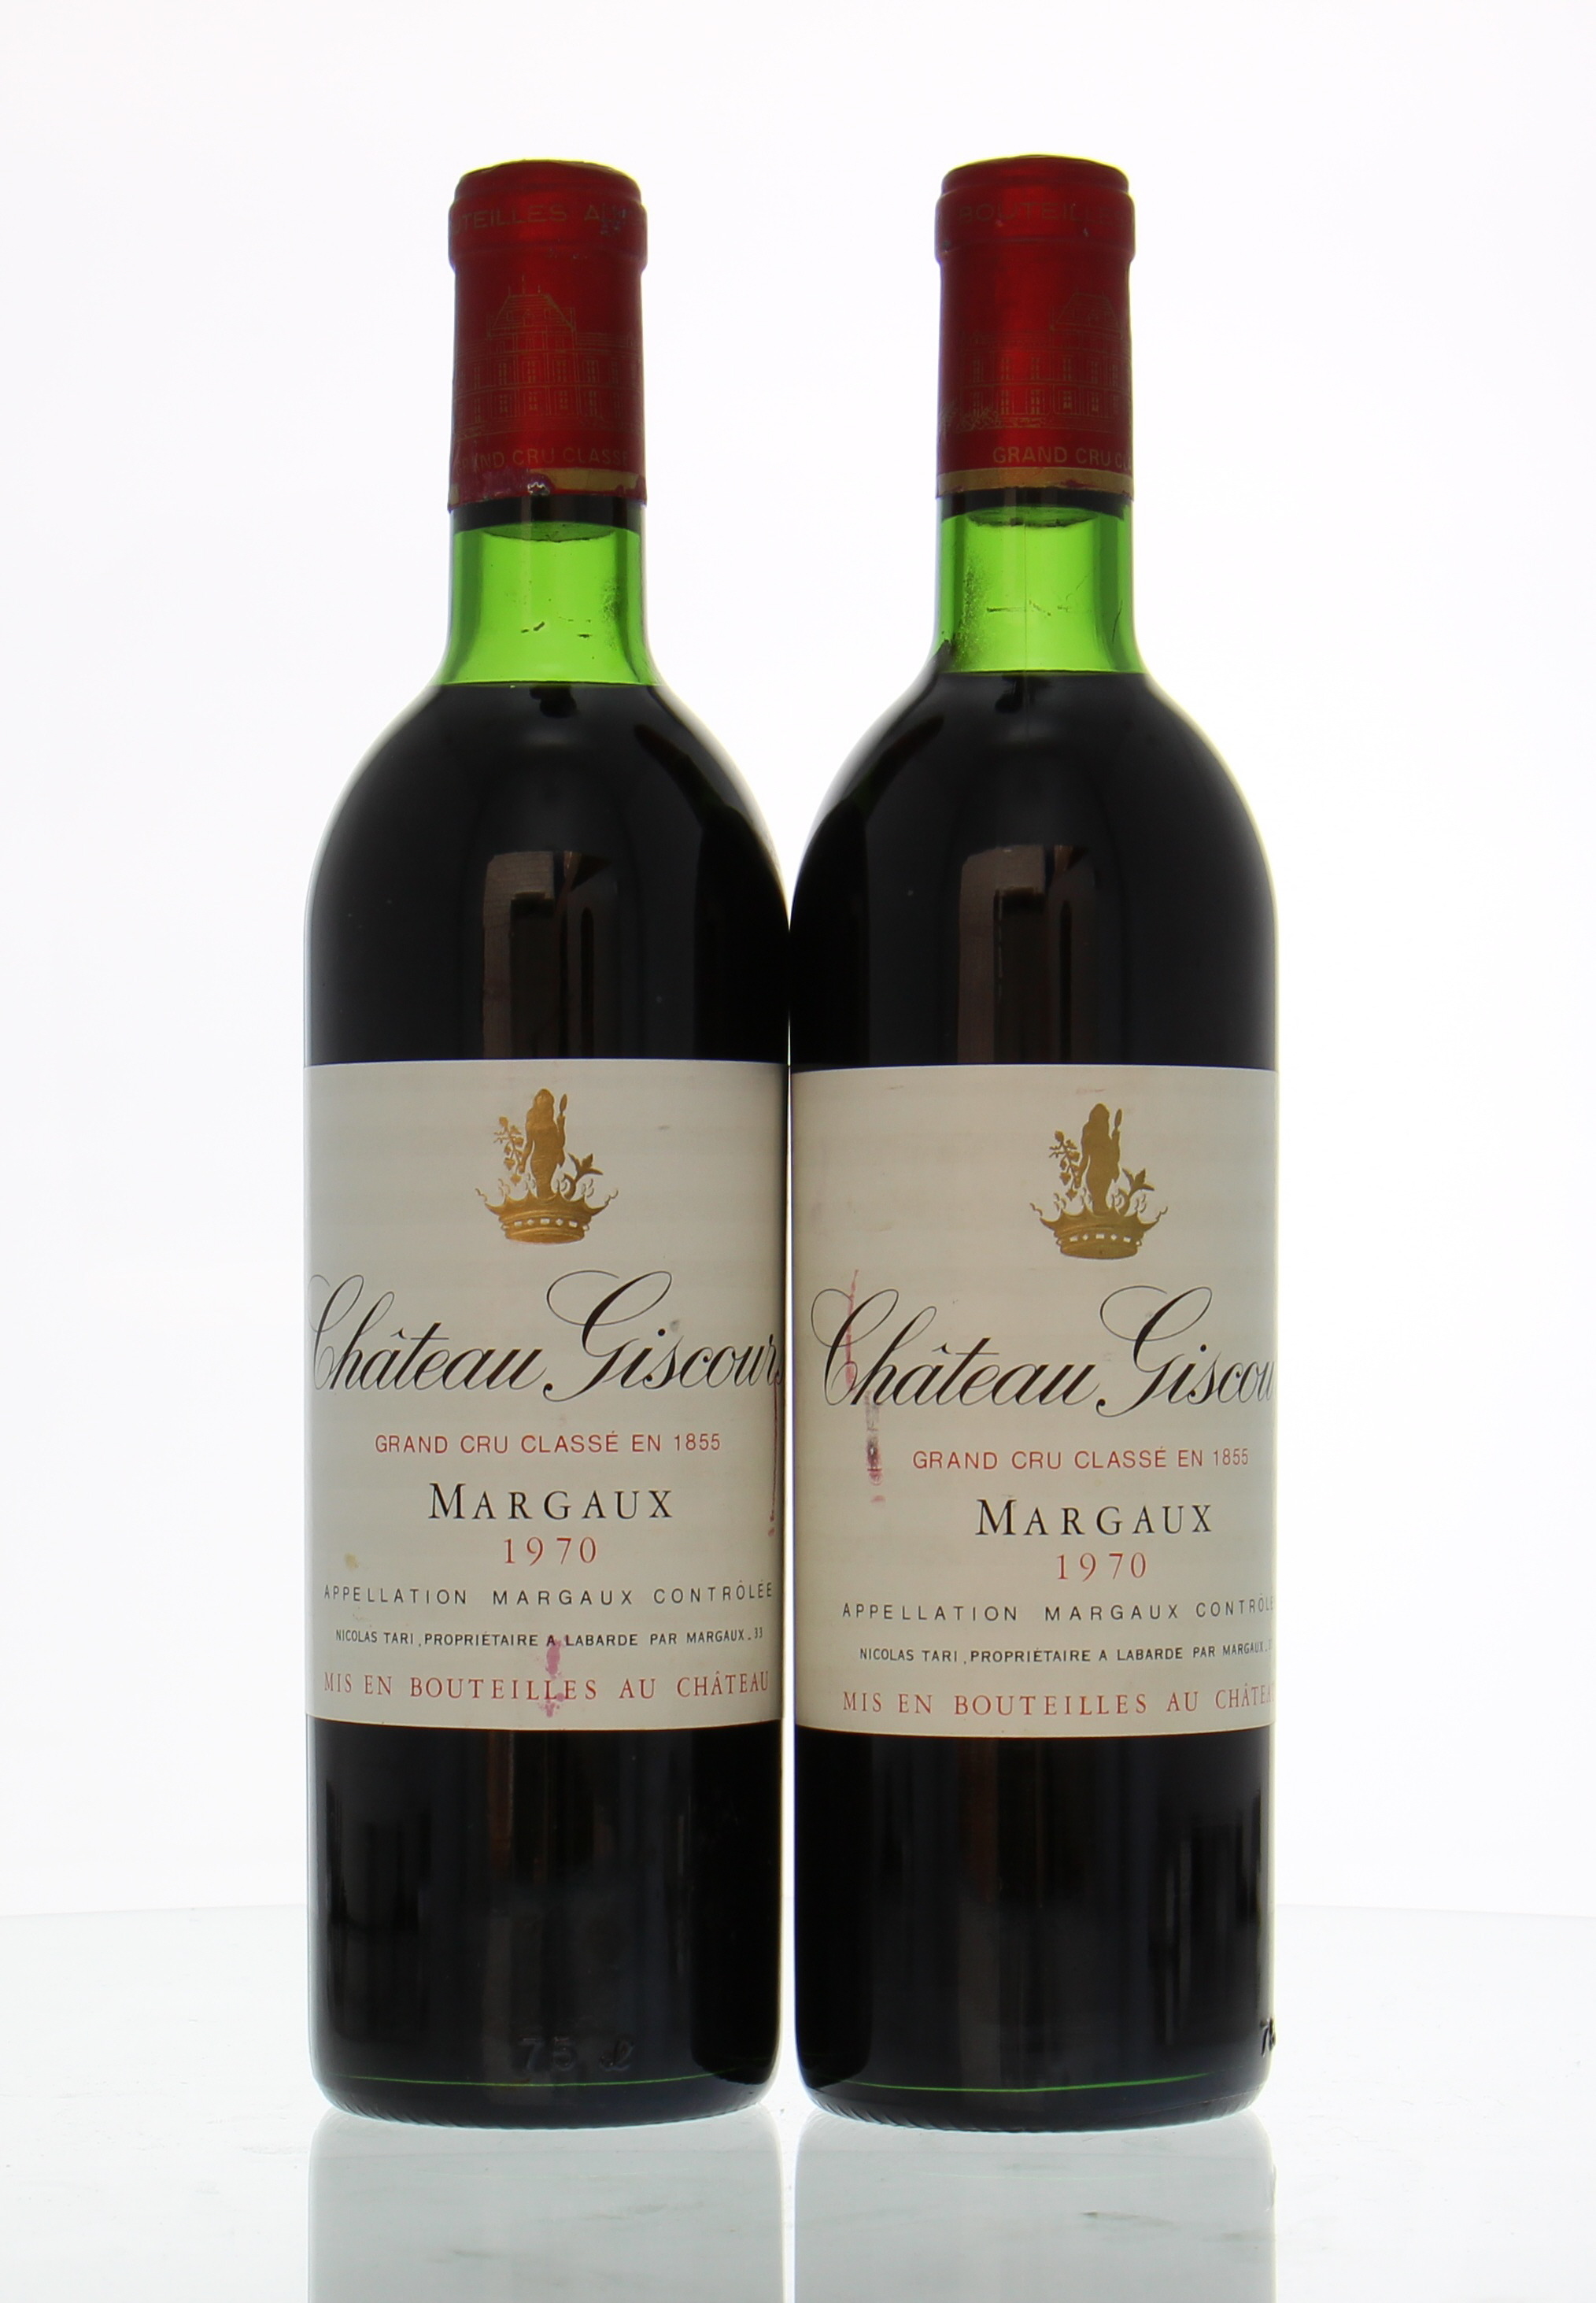 Chateau Giscours - Chateau Giscours 1970 Top shoulder or better